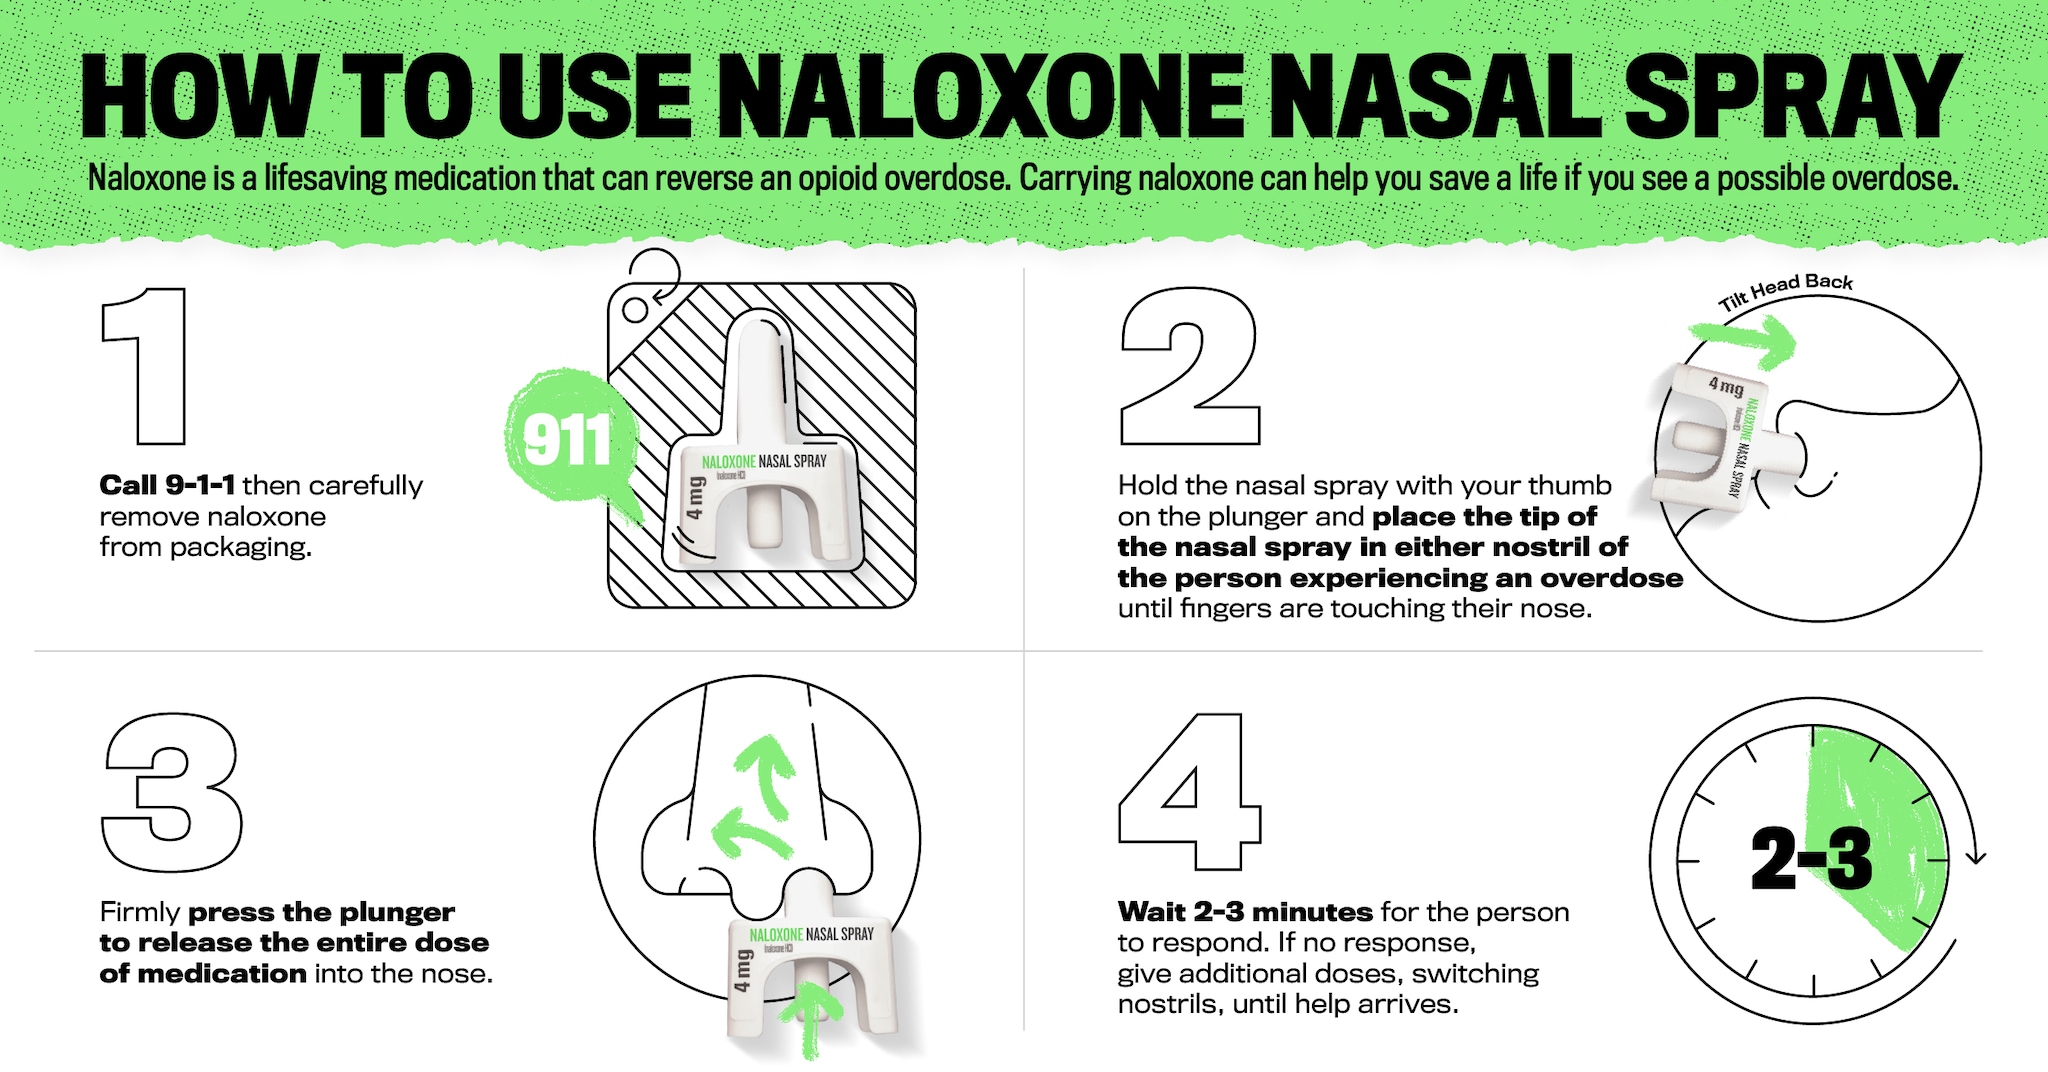 Graphic showing the four steps to use Naloxone nasal spray. 1. Call 911 and remove Naloxone from packaging. 2. Insert the tip of the nasal spray into the nostril of the person experiencing an overdose. 3. Firmly press the plunger. 4. Wait 2-3 minutes for the person to respond. If the person does not respond give the second dose of Naloxone.